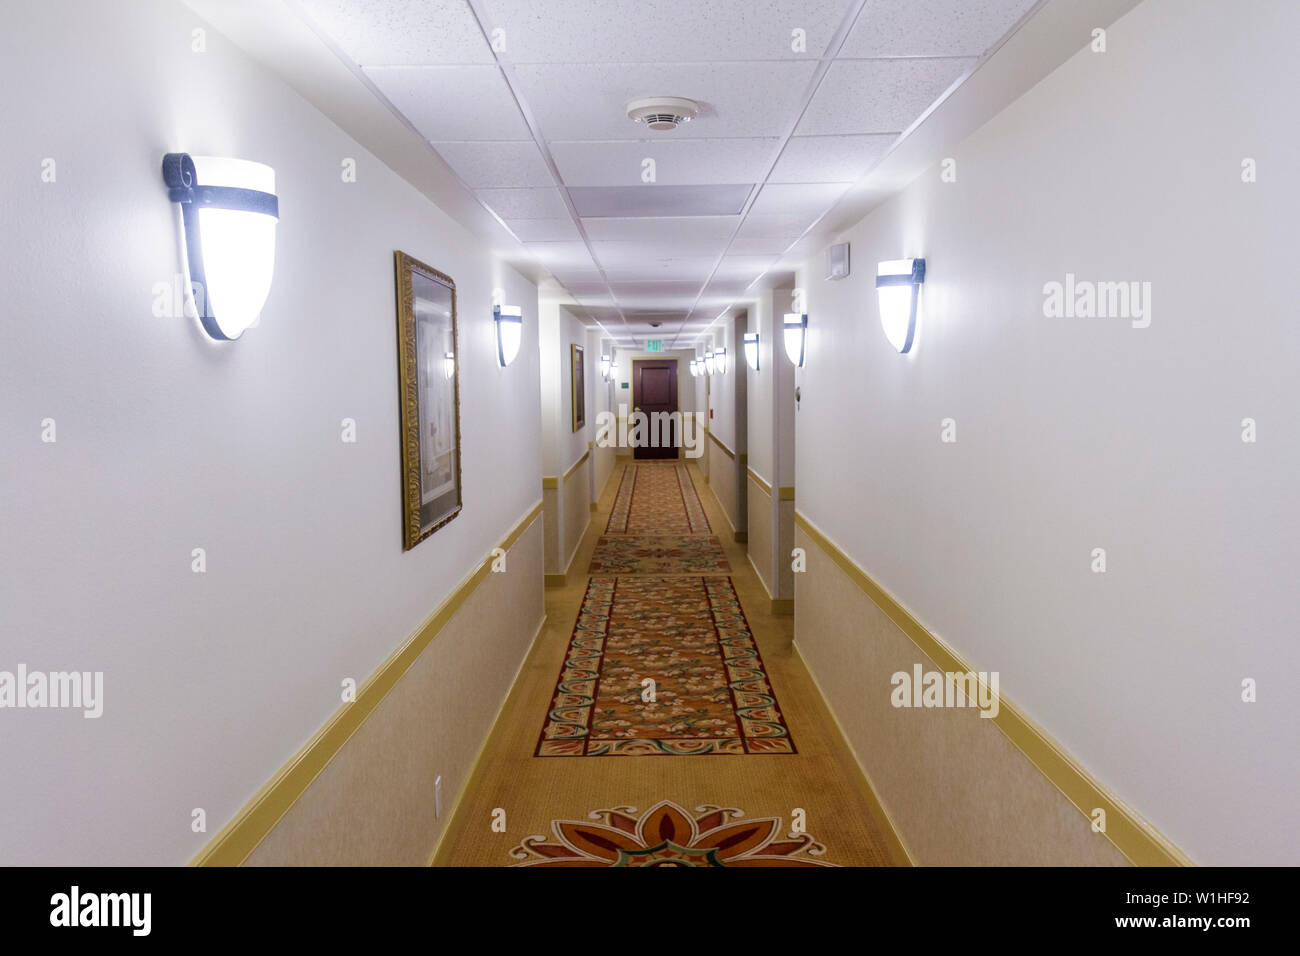 Naples Florida,Doubletree Guest Suites,motel,hotel hotels lodging inn motel motels,hallway,wall sconce,light,corridor,neutral color,visitors travel tr Stock Photo